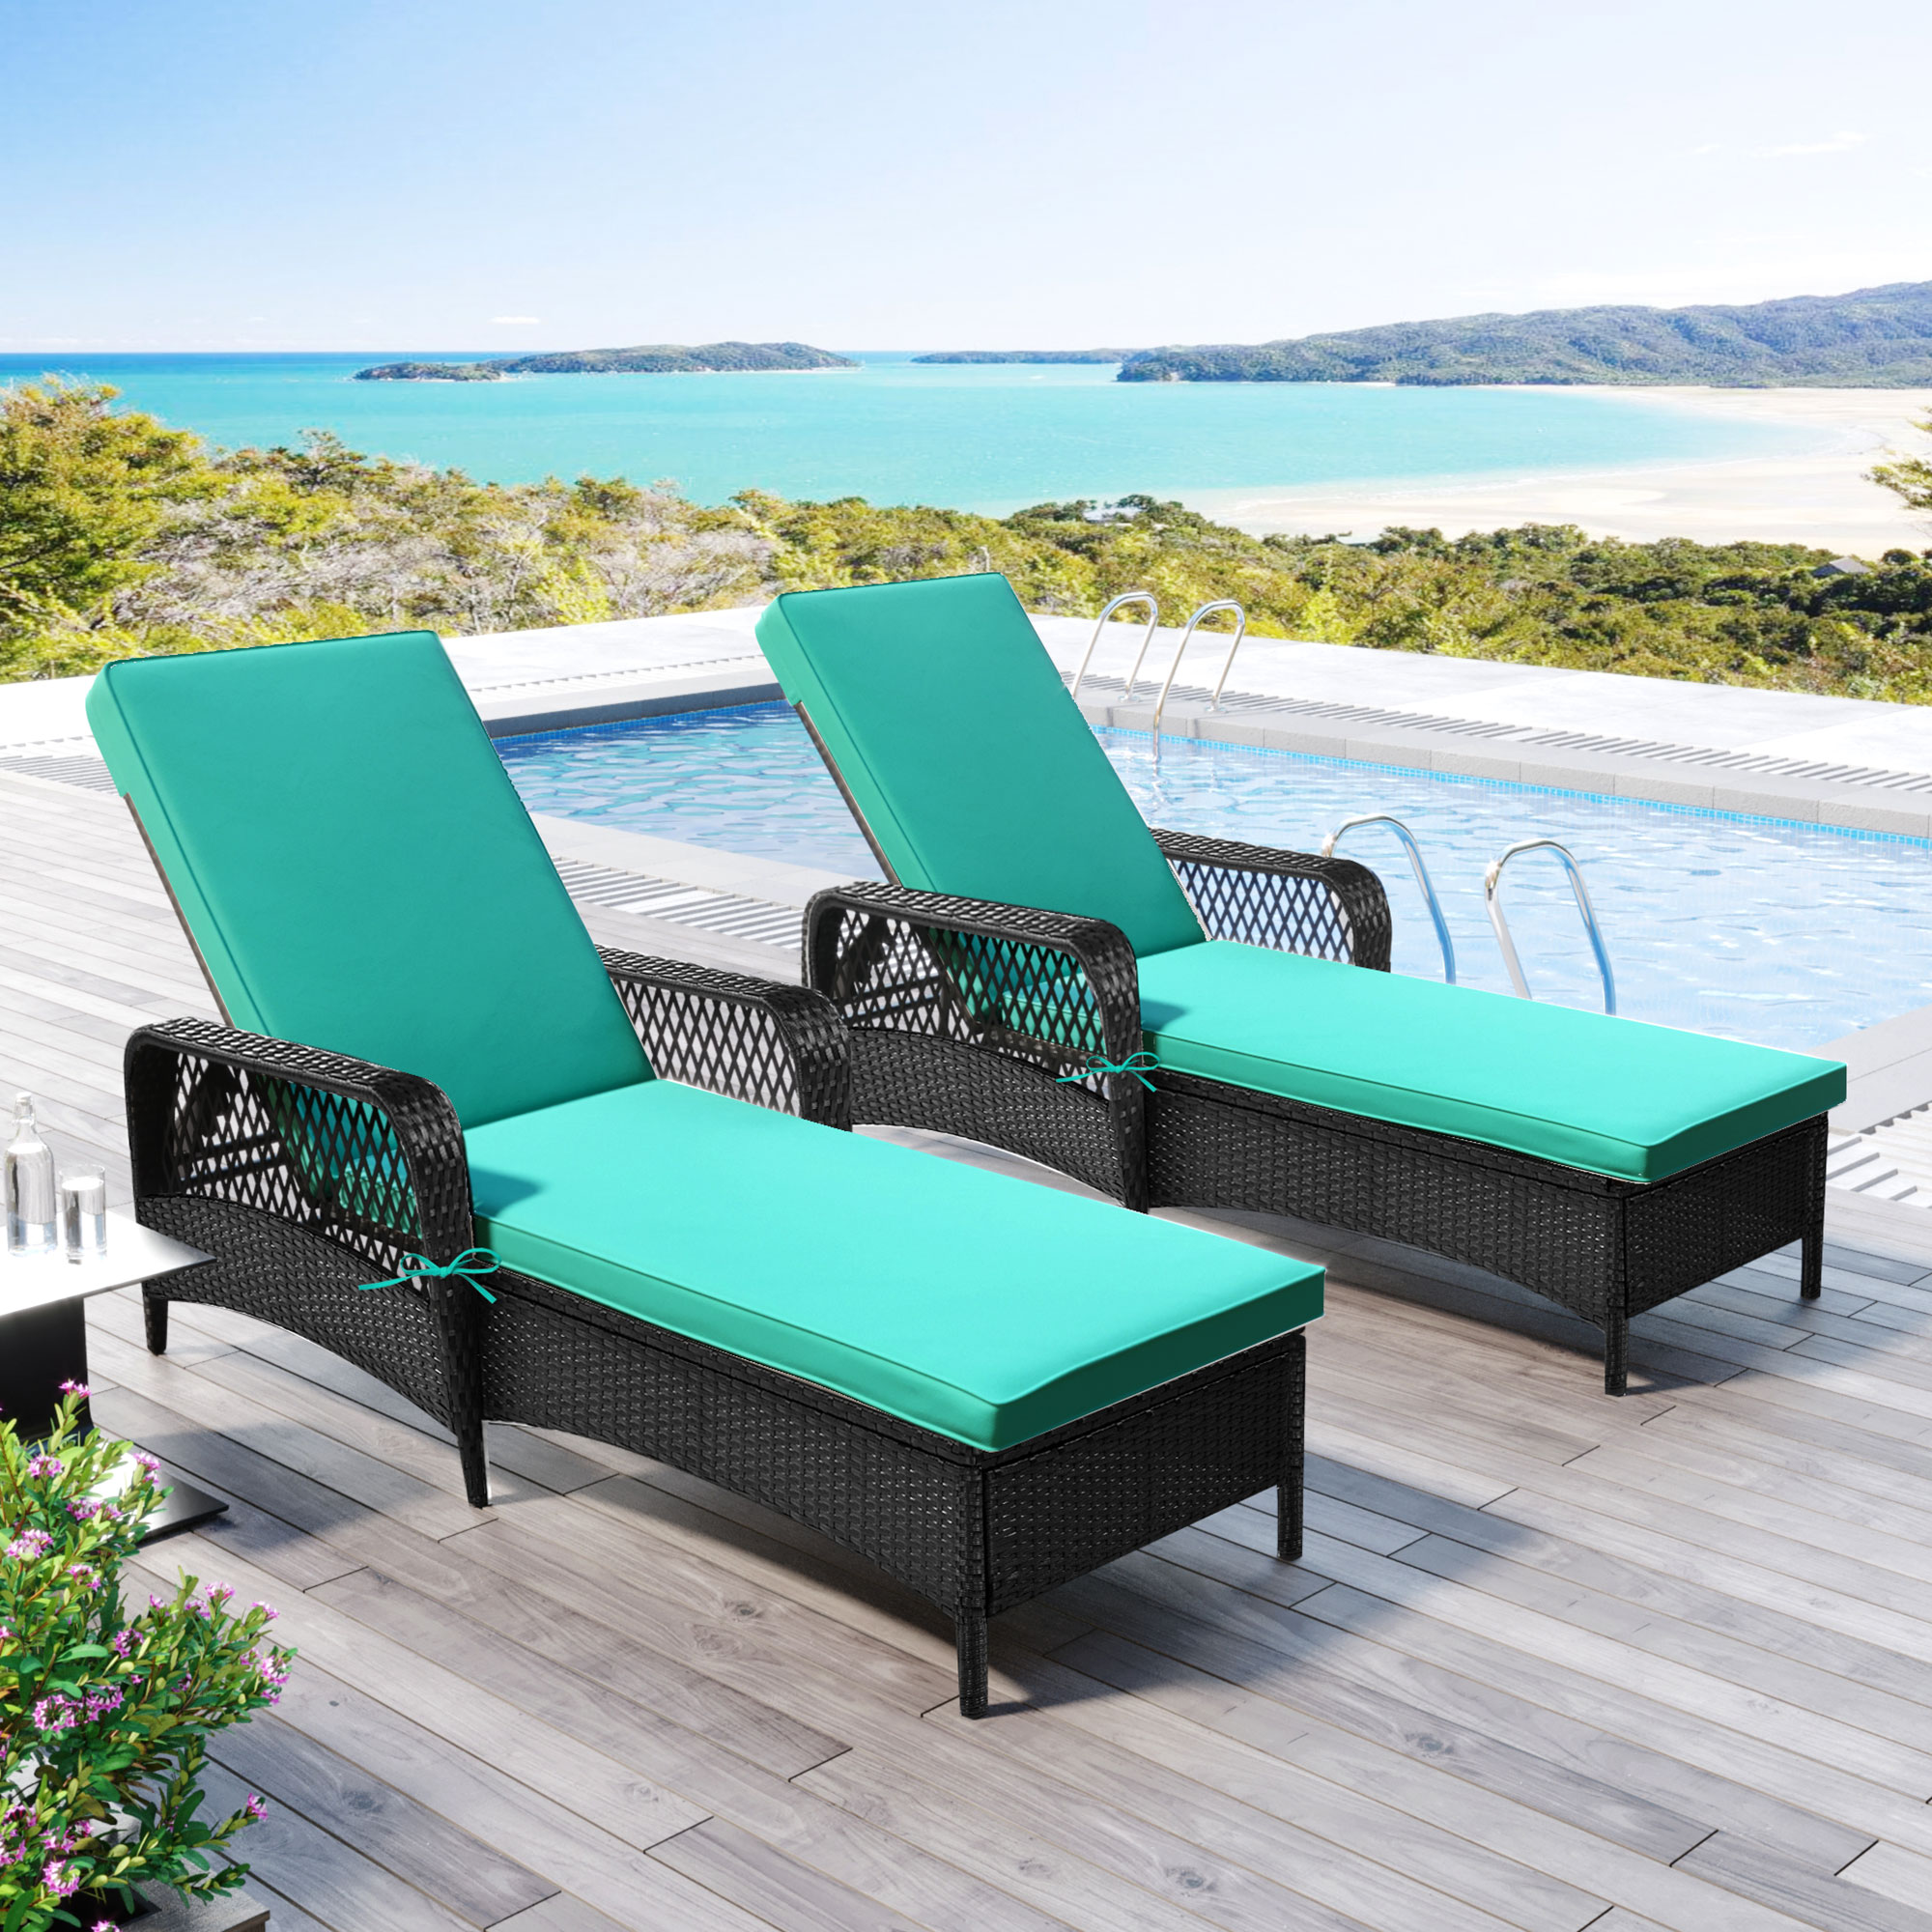 SYNGAR Outdoor Chaise Lounge Chairs, Patio Reclining Sun Lounger, PE Wicker Rattan Adjustable Lounge Chair with Thickened Cushion, Reclining Chair for Poolside, Deck, Backyard, 2 Pack, Green - image 3 of 11